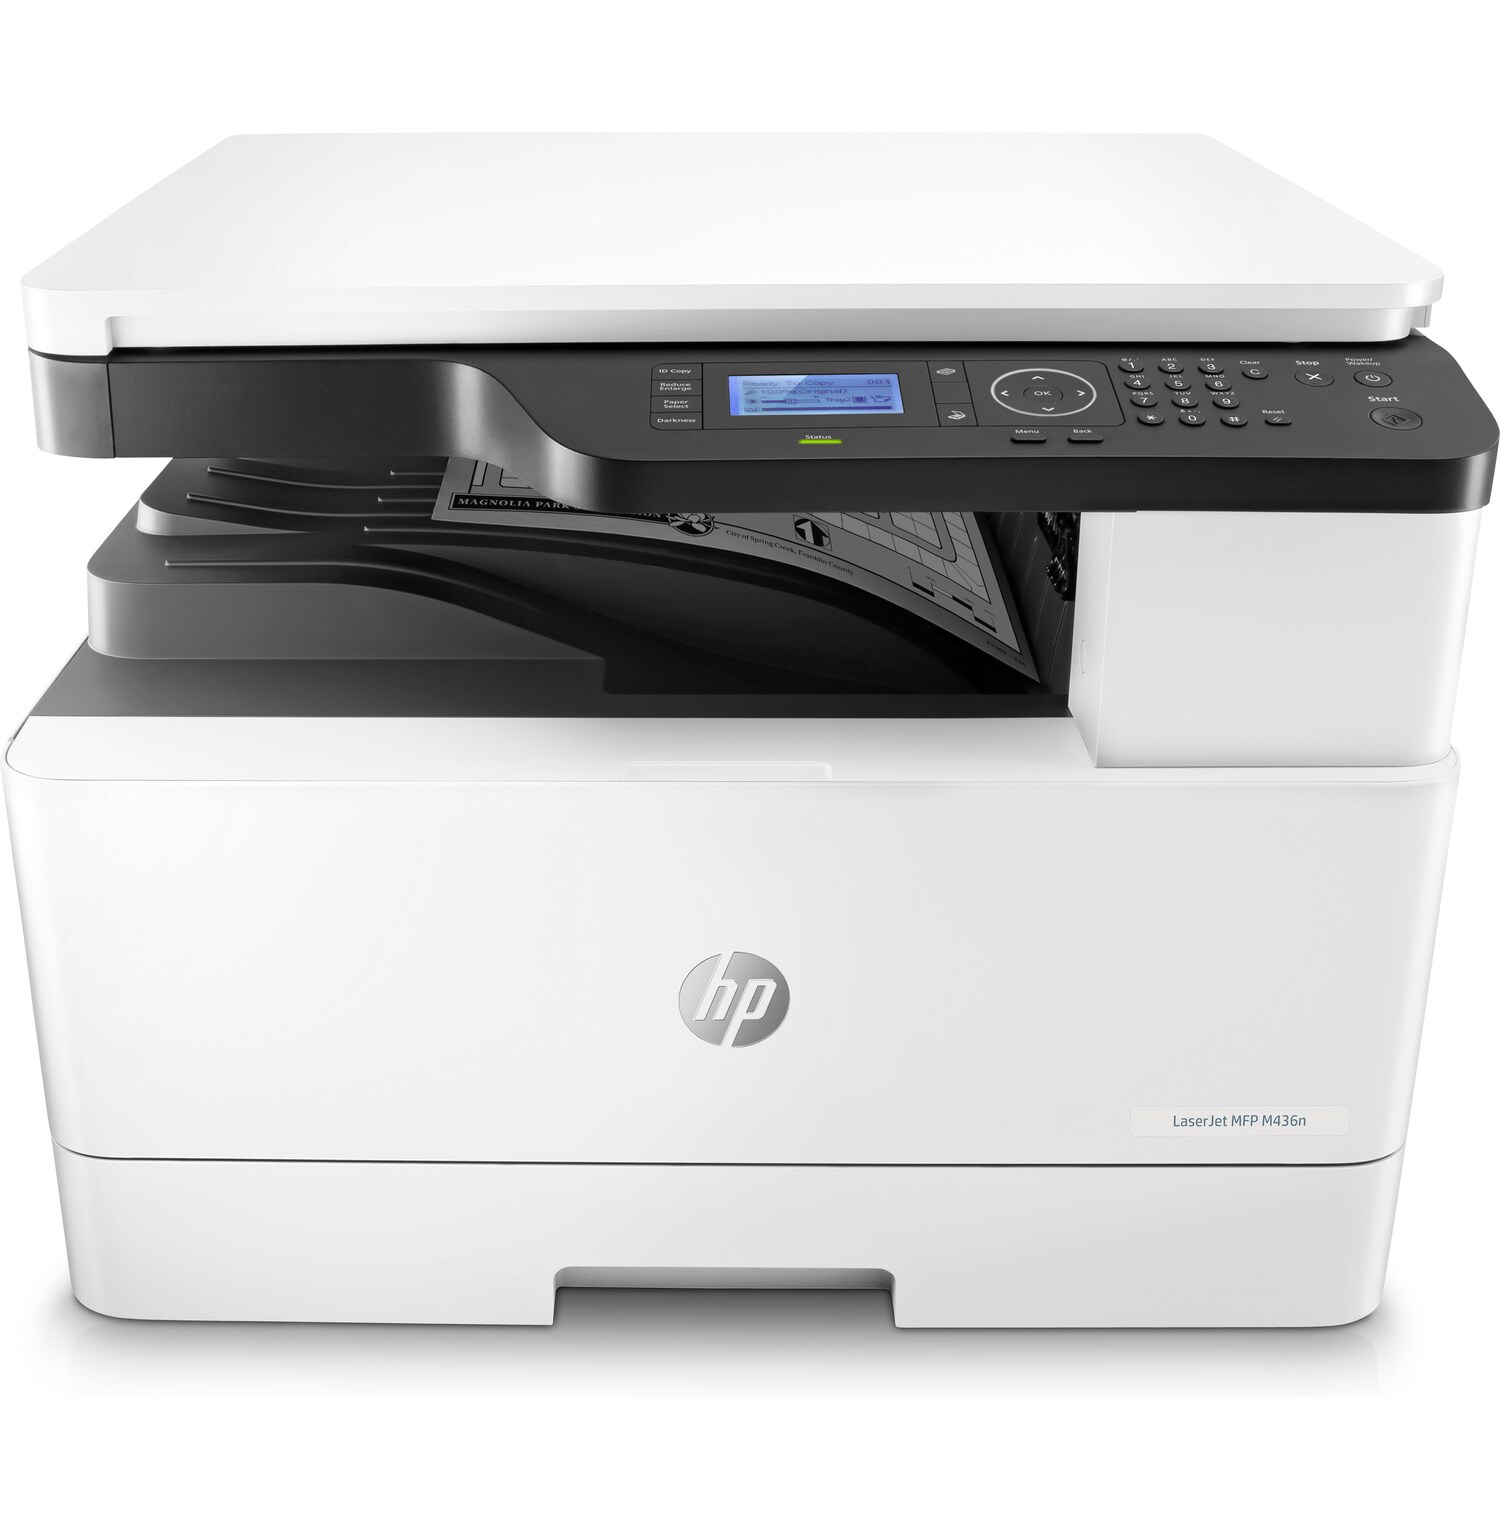 HP LASERJET 436N PRINTER: As fast as 8.8 sec, PRINT SPEED BLACK (ISO, A4), Normal: Up to 23 ppm, Up to 50,000 pages per month. HP LASERJET 436NHP LASERJET 436N PRINTER: As fast as 8.8 sec, PRINT SPEED BLACK (ISO, A4), Normal: Up to 23 ppm, Up to 50,000 pages per month. HP LASERJET 436N